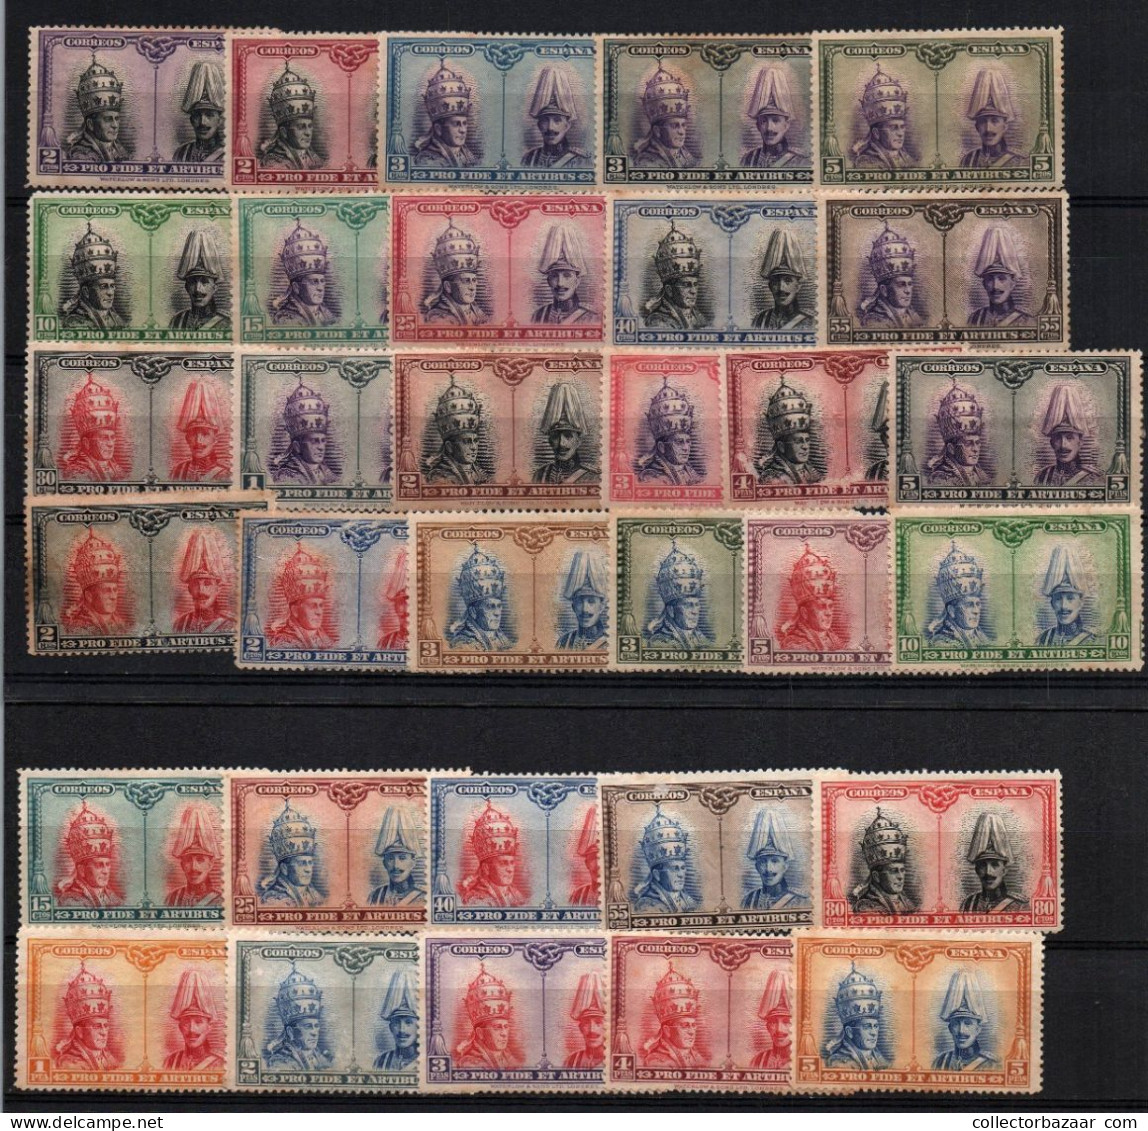 Spain Catacombs Papal Pope Complete Nos. B74-B105 (32) MH $70 - Unused Stamps